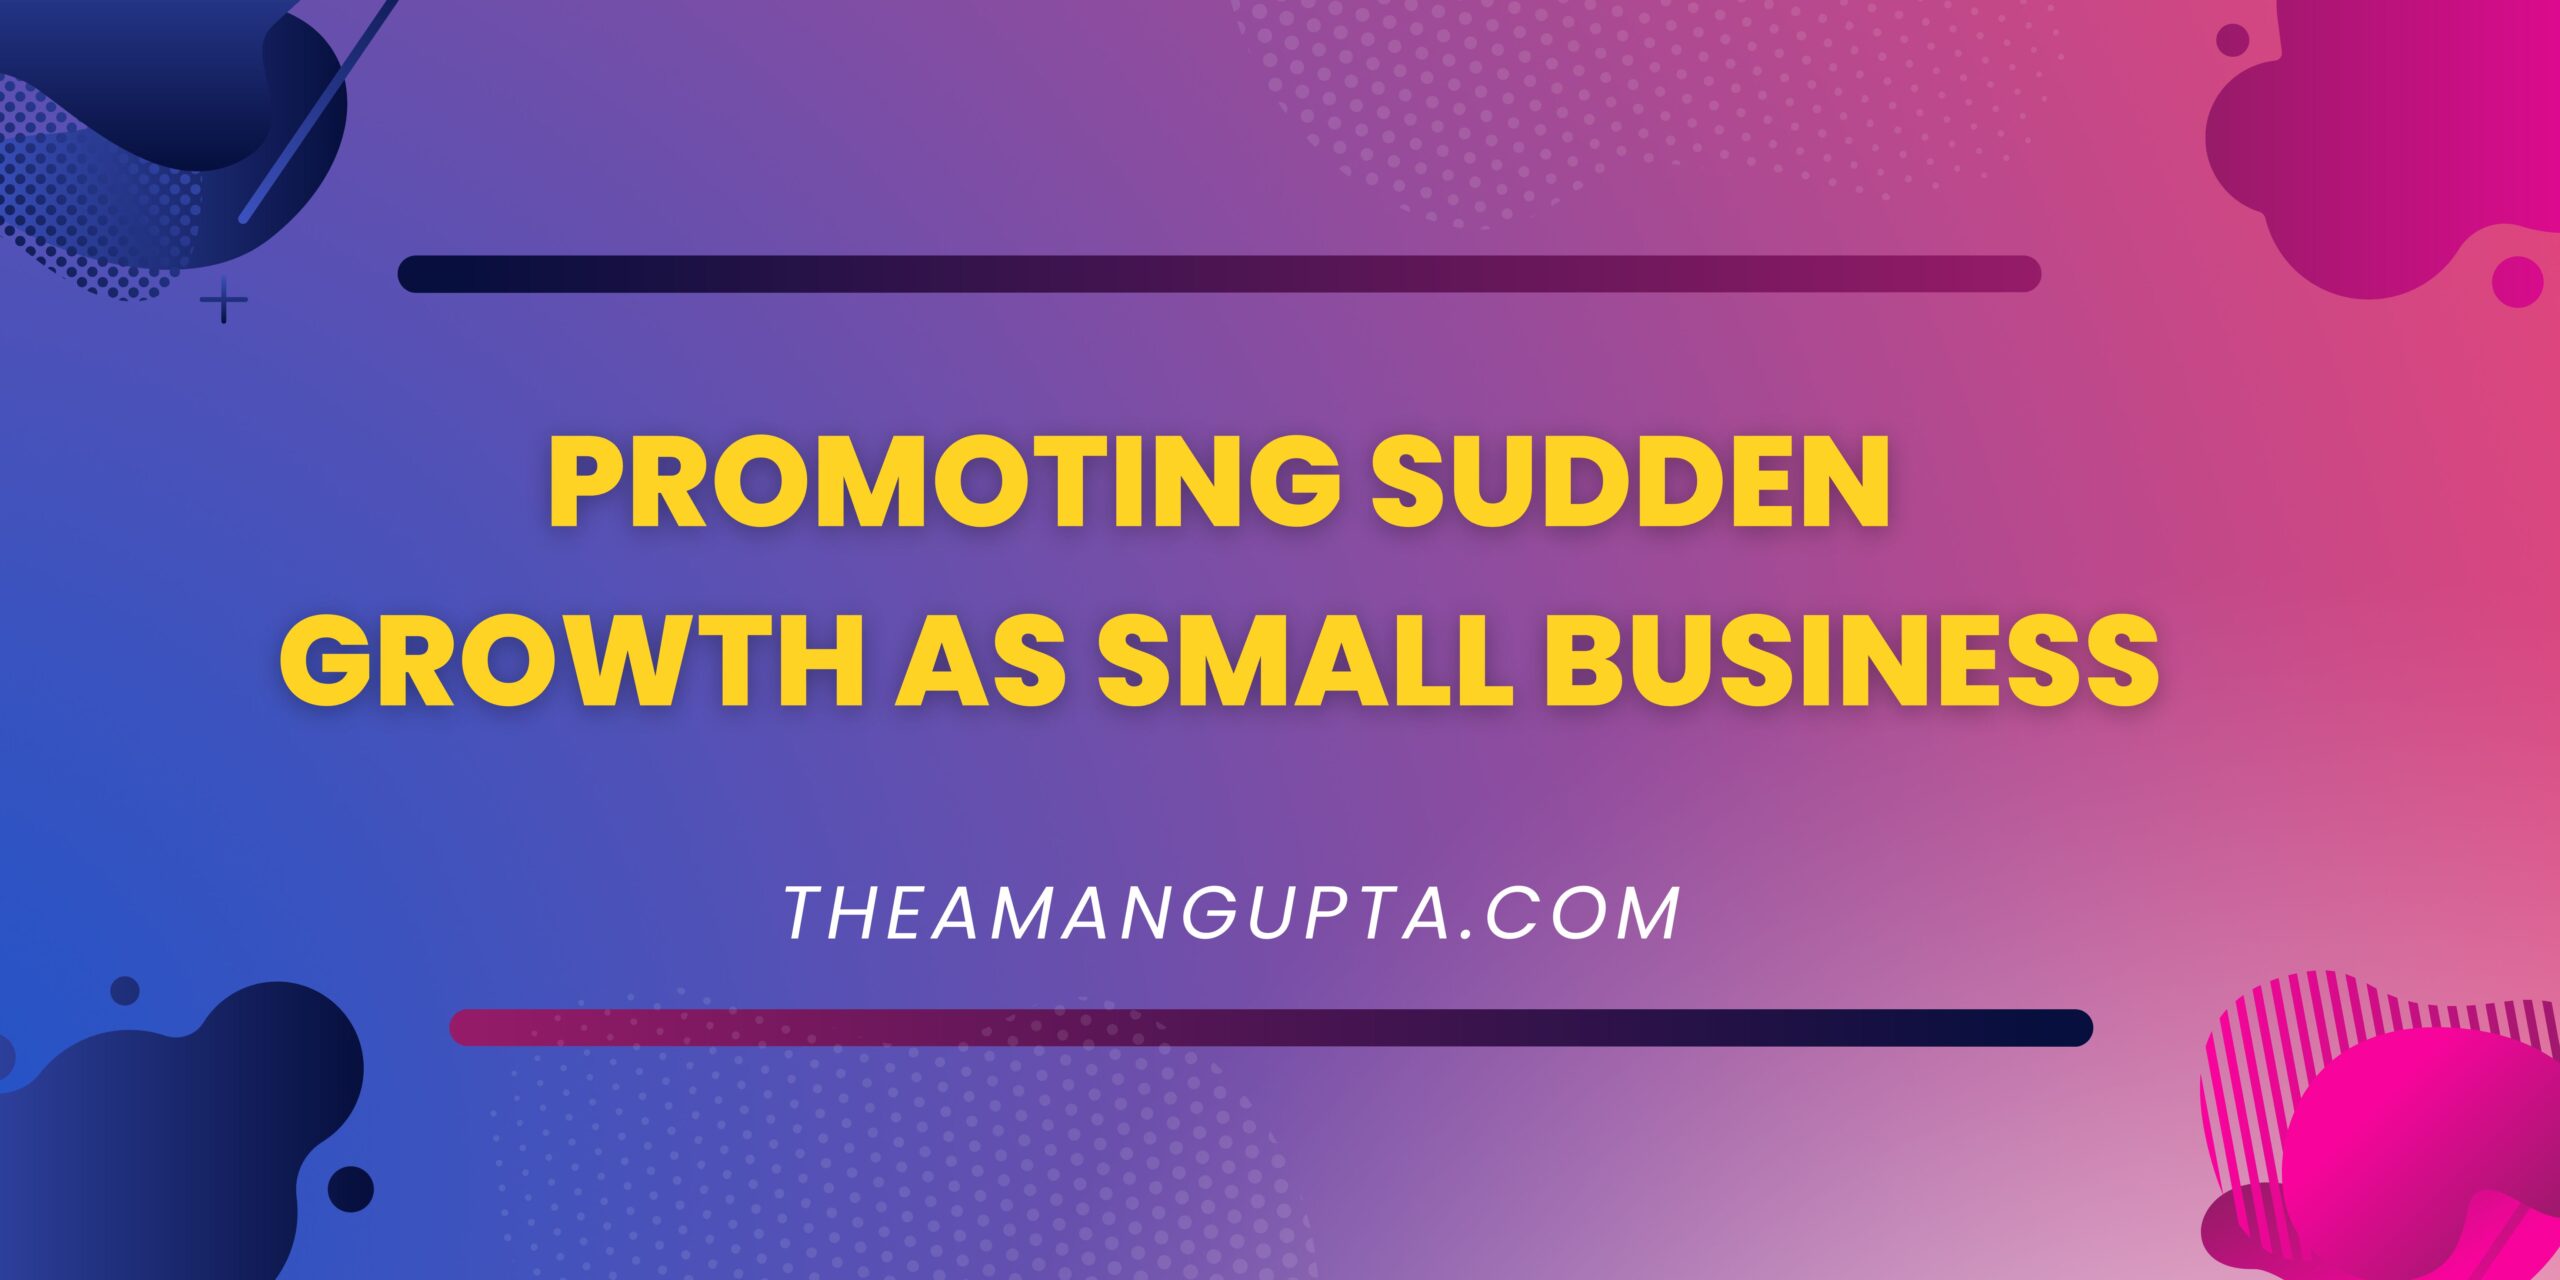 Promoting Sudden Growth As Small Business|Small Business|Theamangupta|Theamangupta